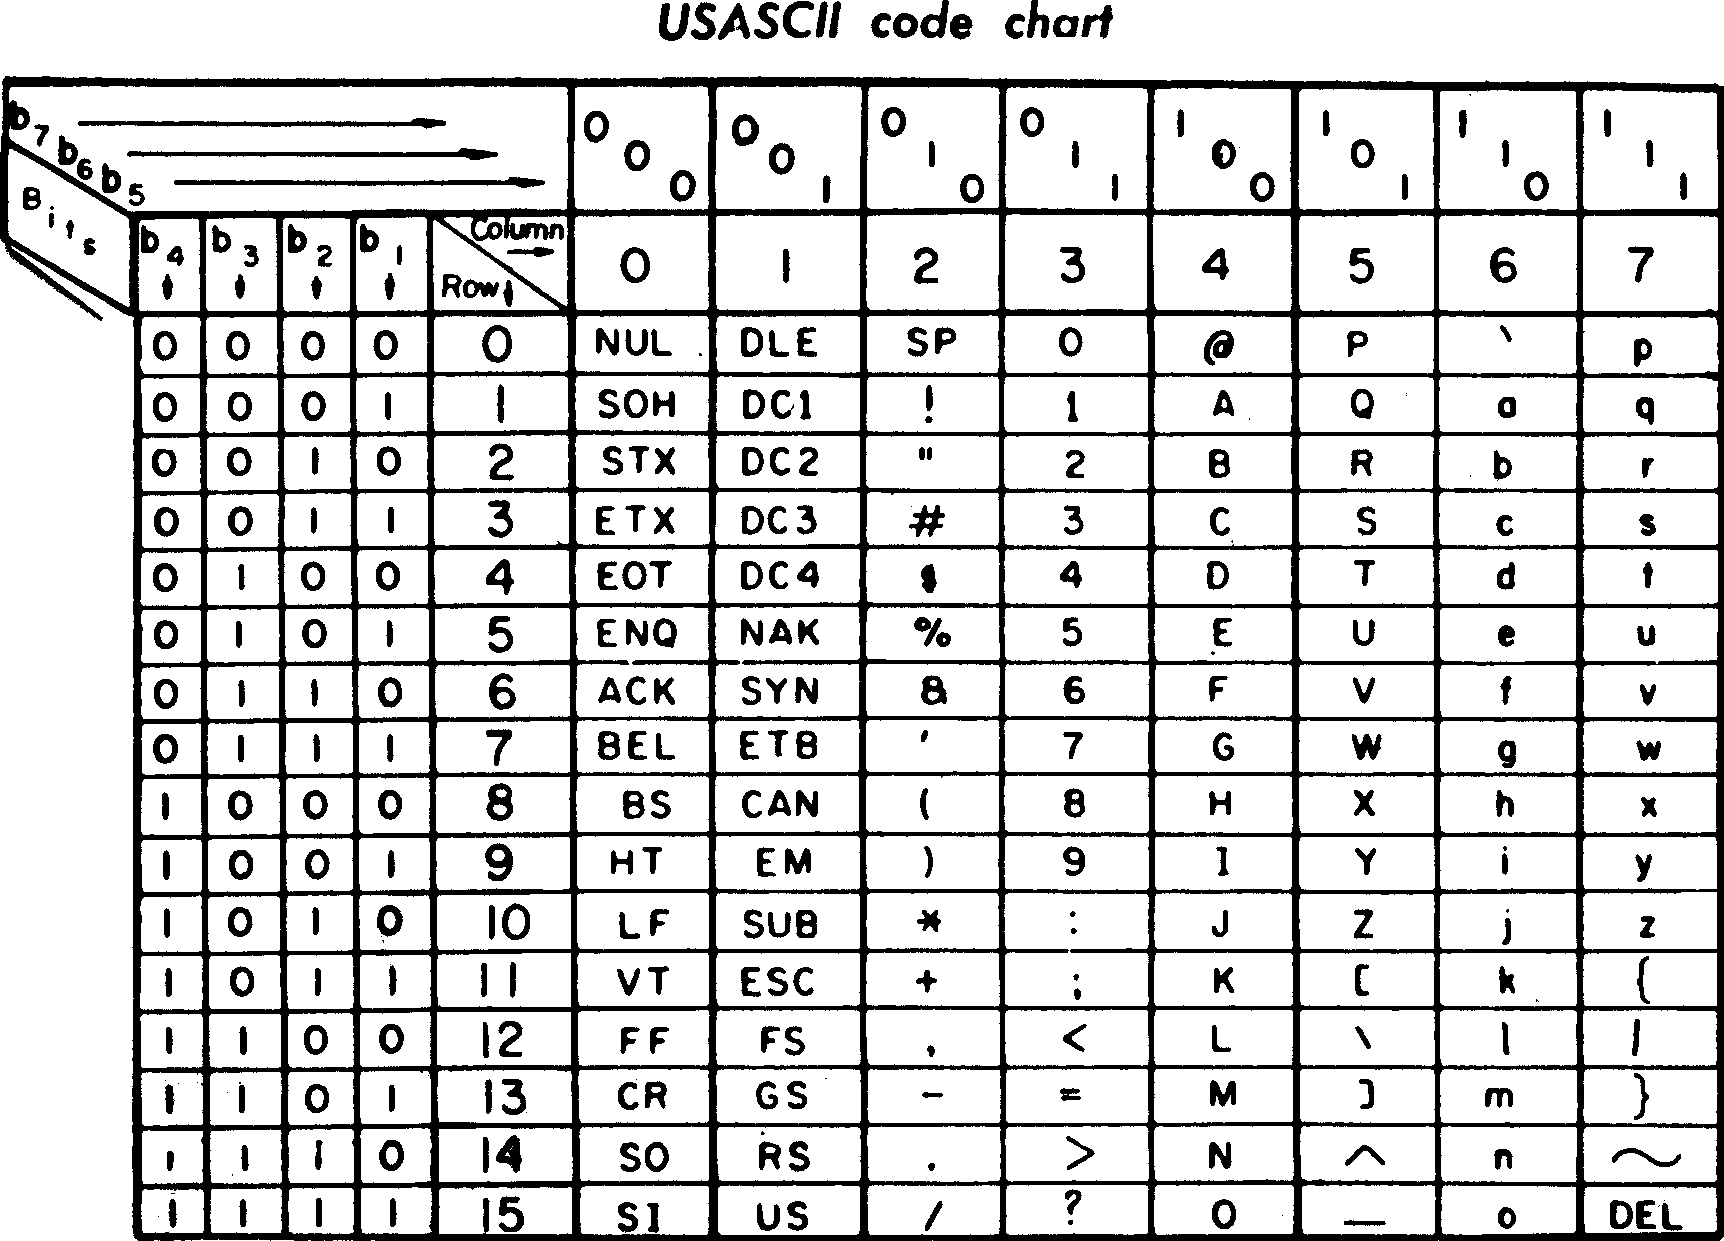 ASCII chart with 8 sticks (i.e. columns) and 16 rows, demonstrating the underlying structure of ASCII